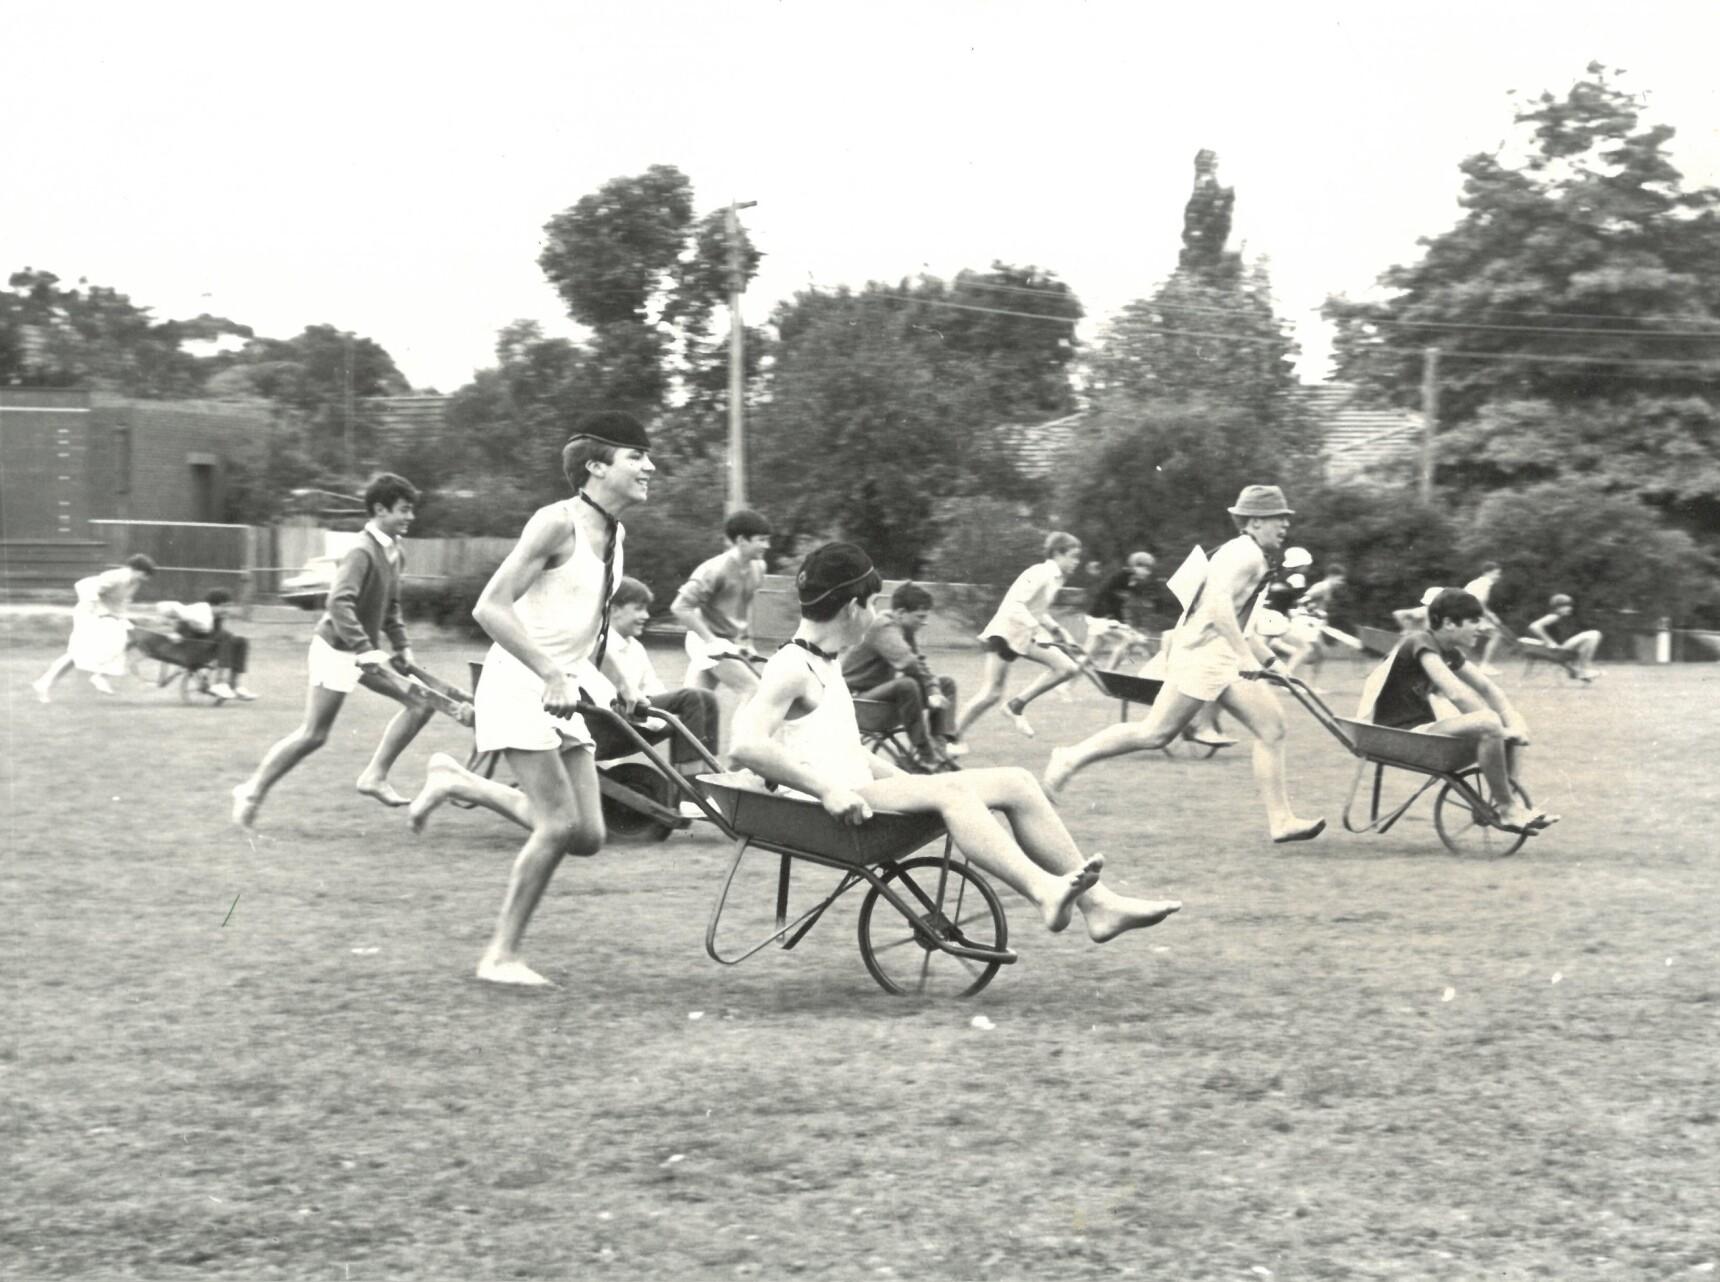 A House wheelbarrow racing competition in 1954.